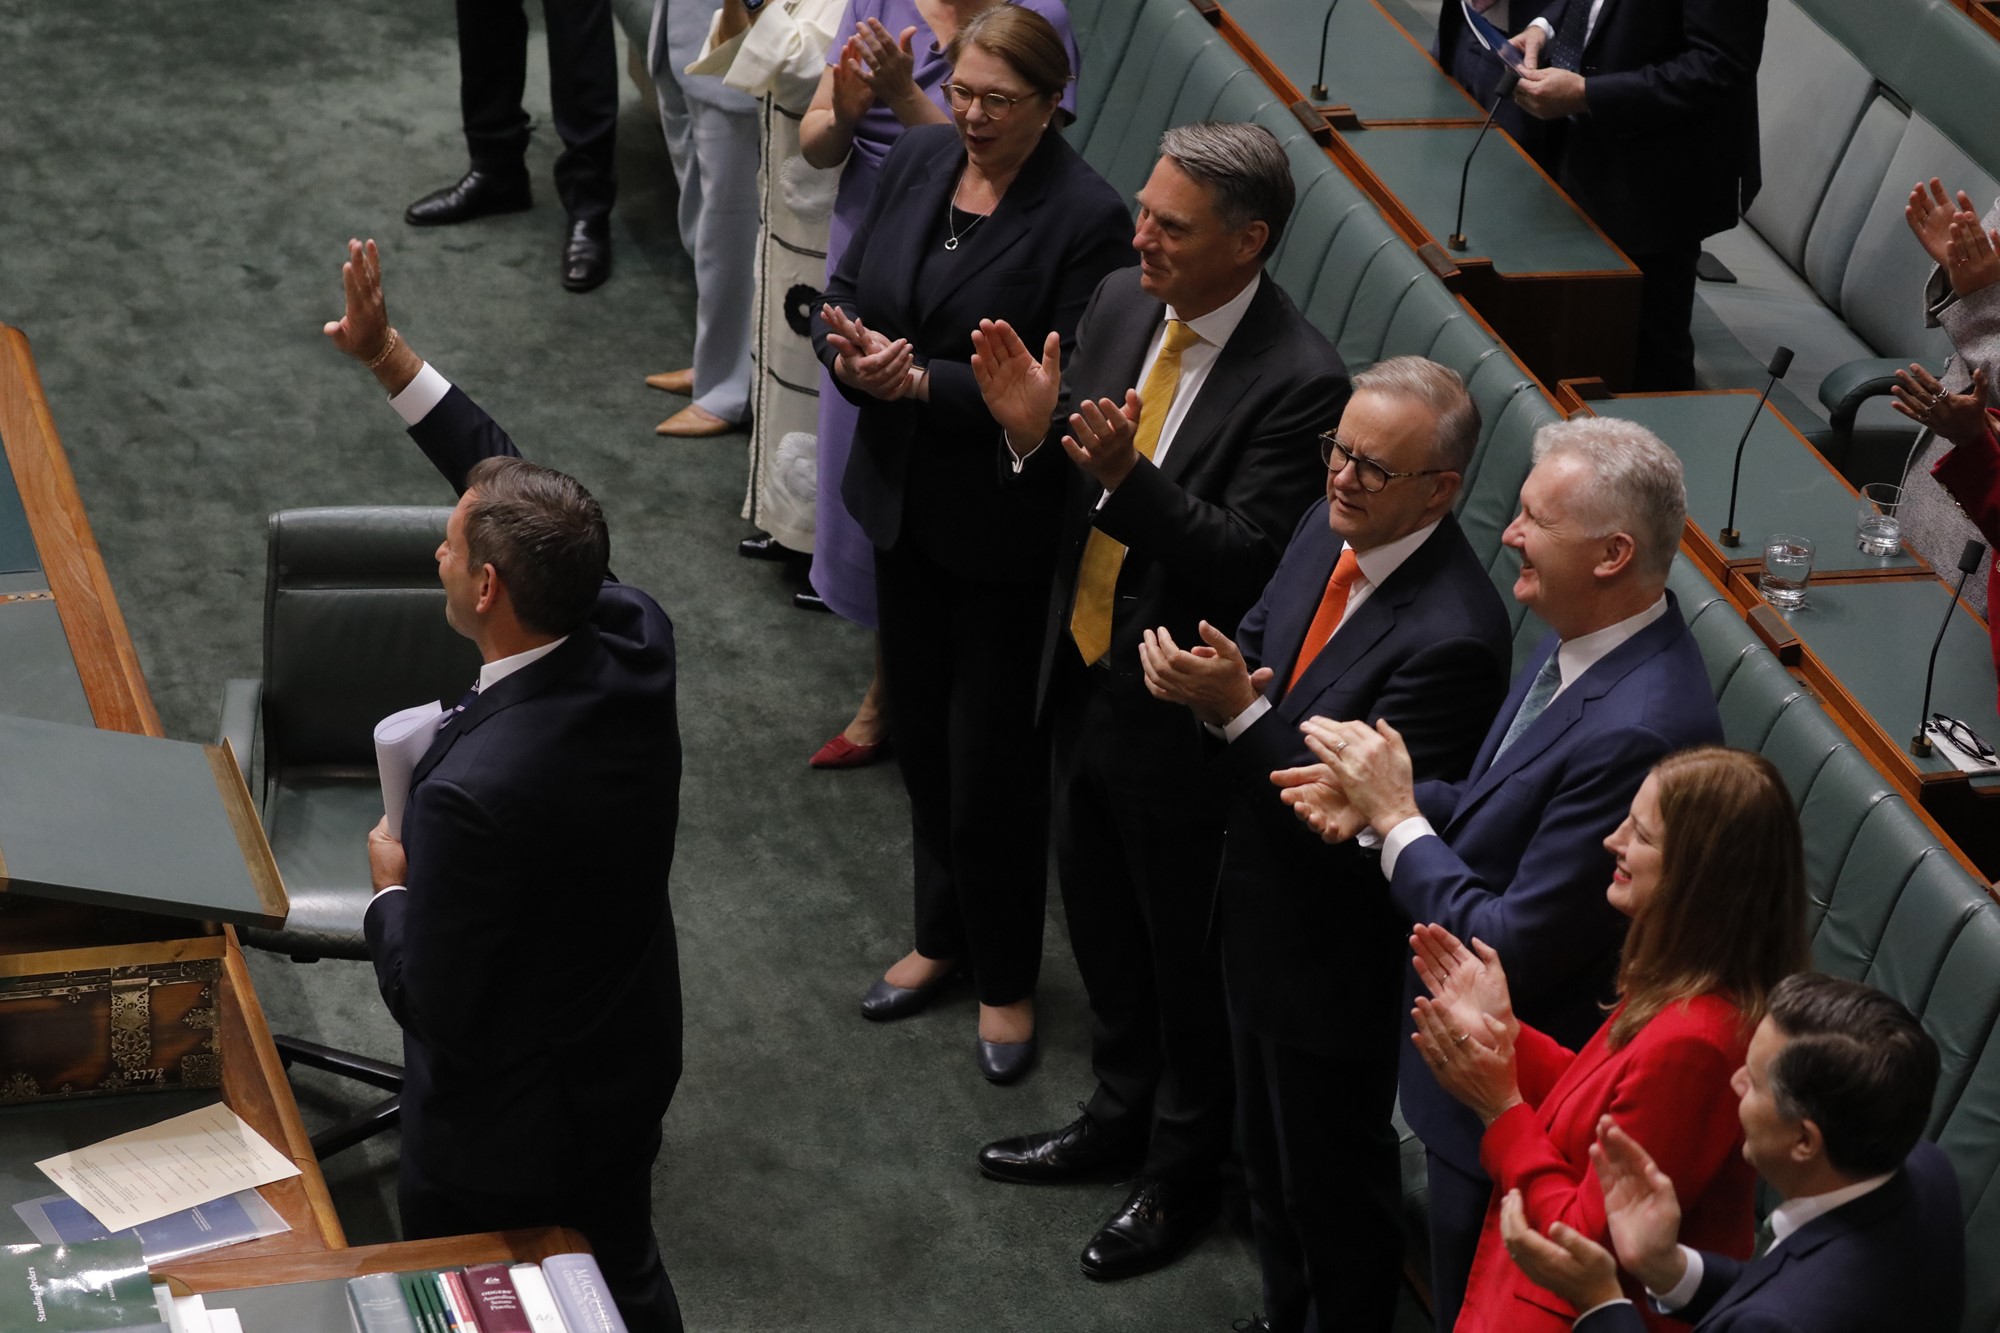 The Treasurer stands in Parlaiment waving as people applaud him following the budget speech.